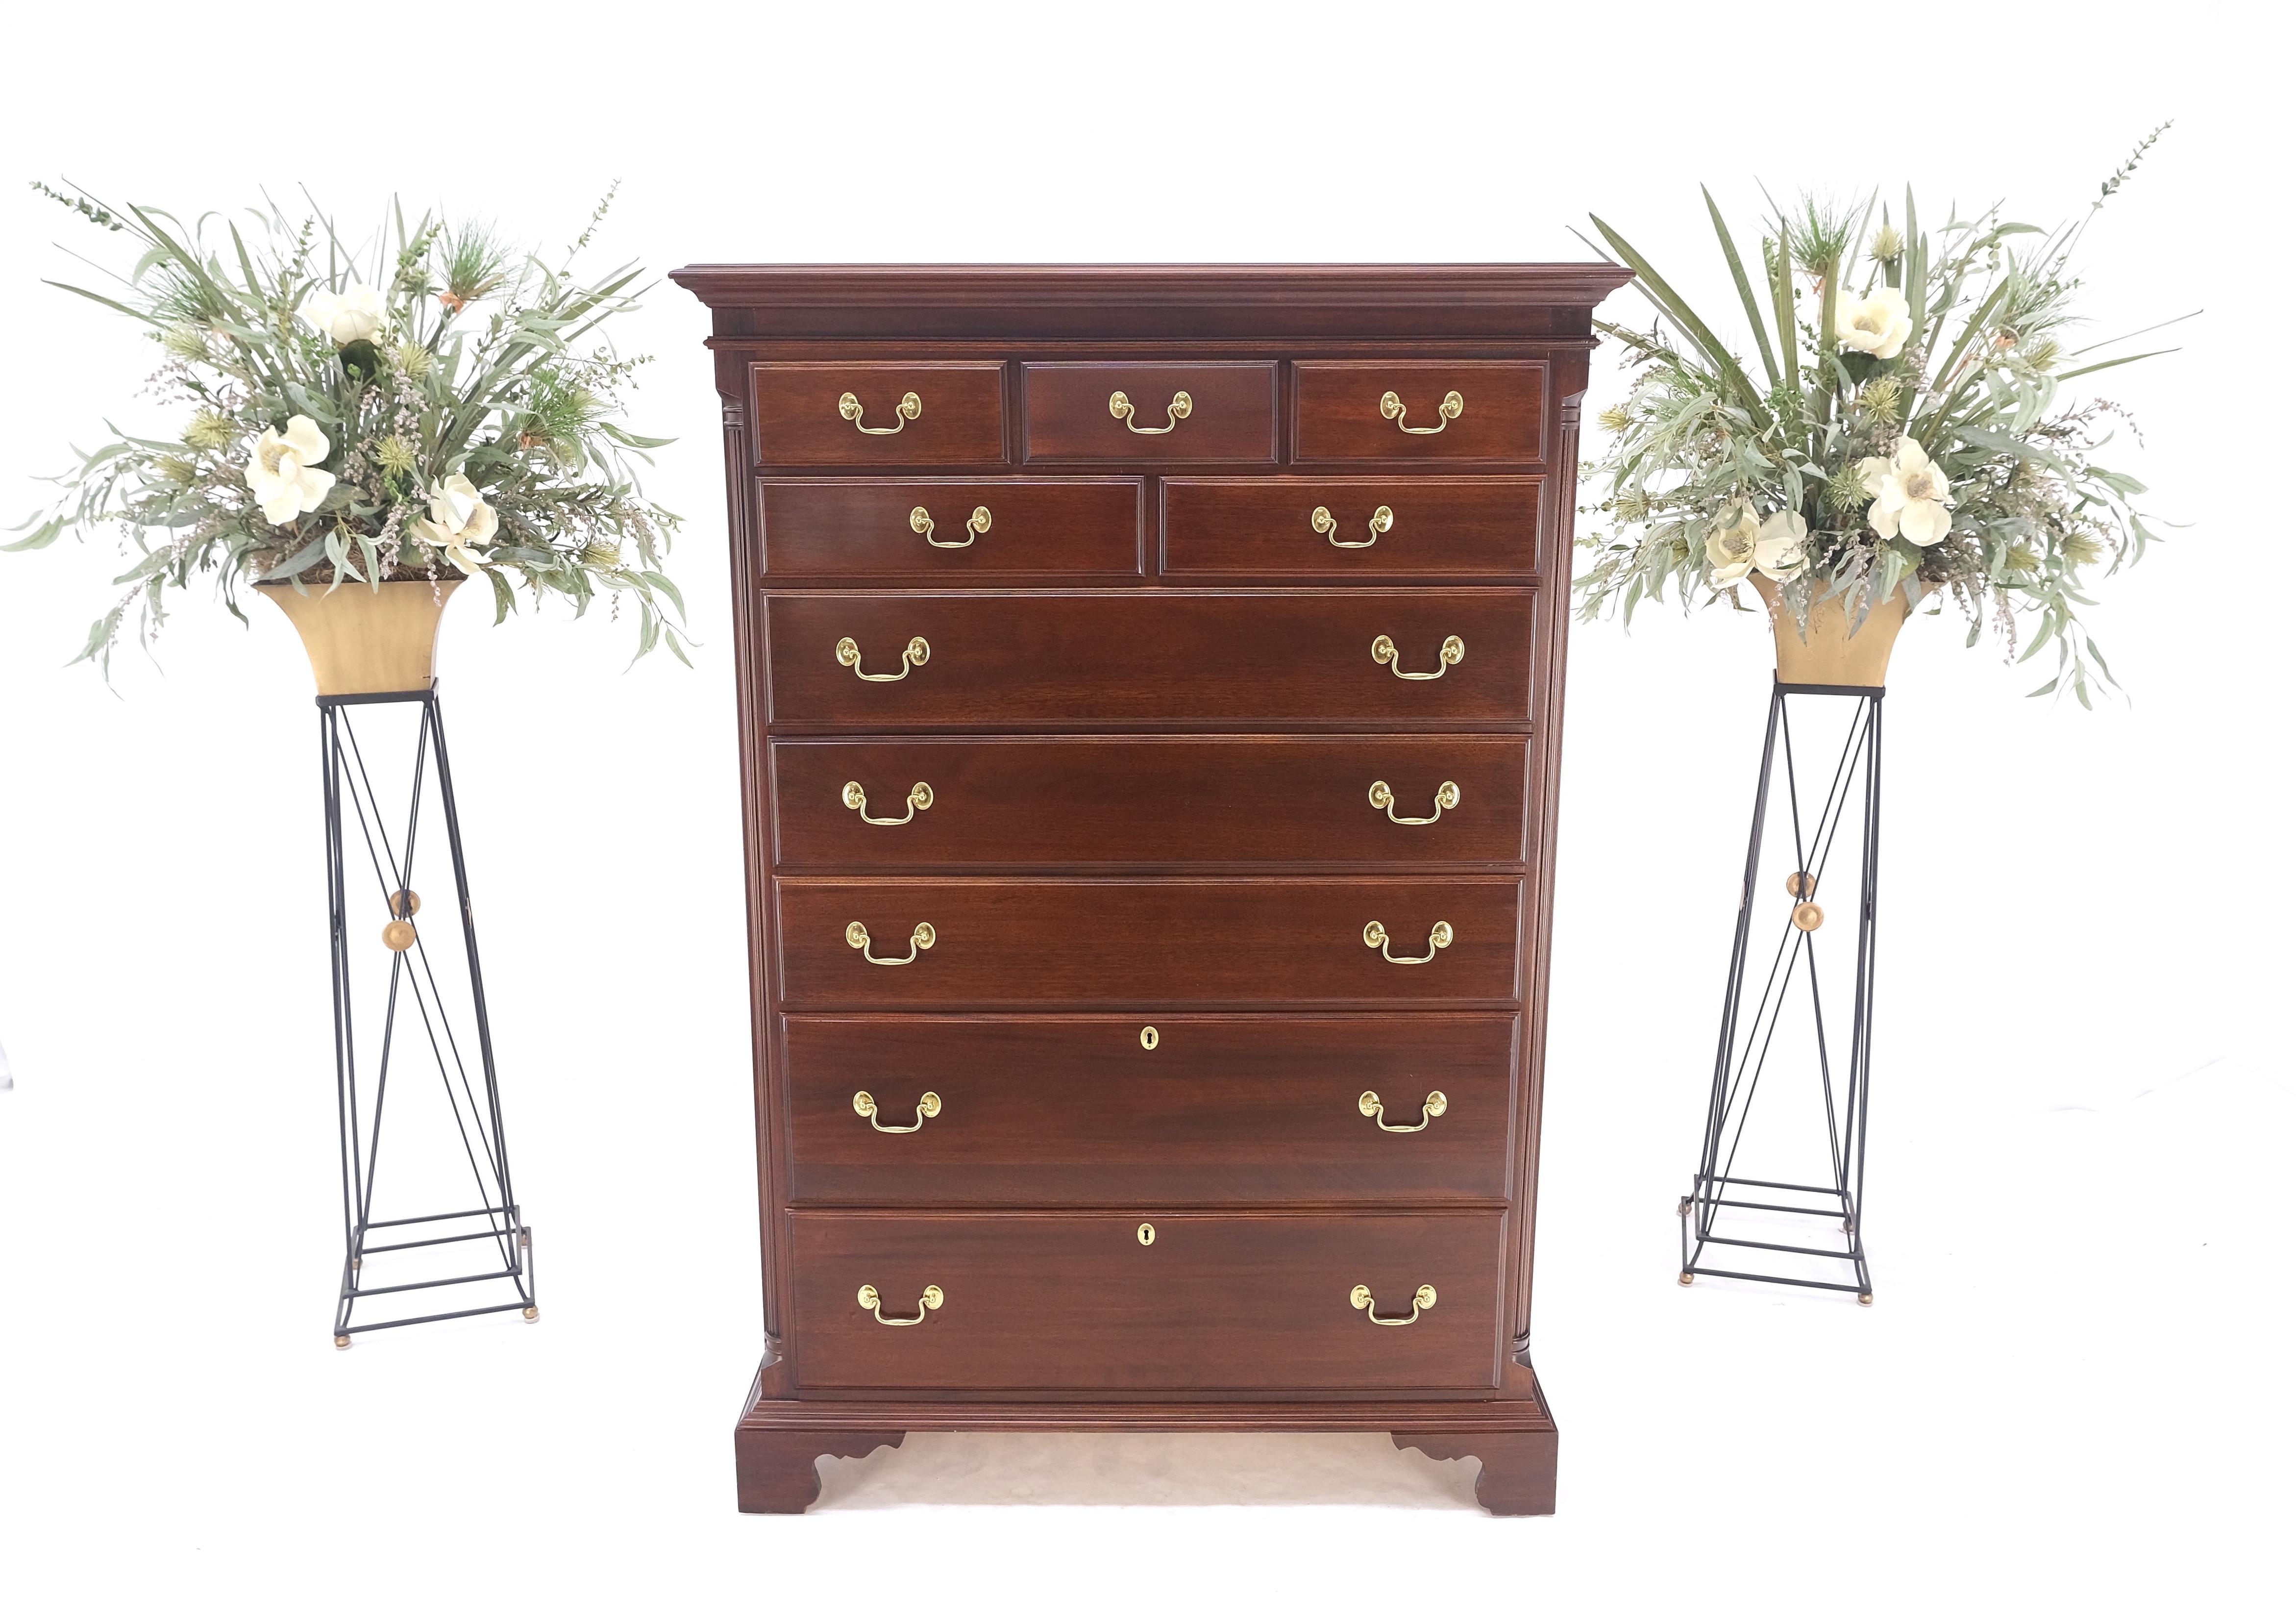 Lacquered Solid Mahogany Brass Drop Pulls Federal High Boy Dresser Chest of Drawers MINT! For Sale